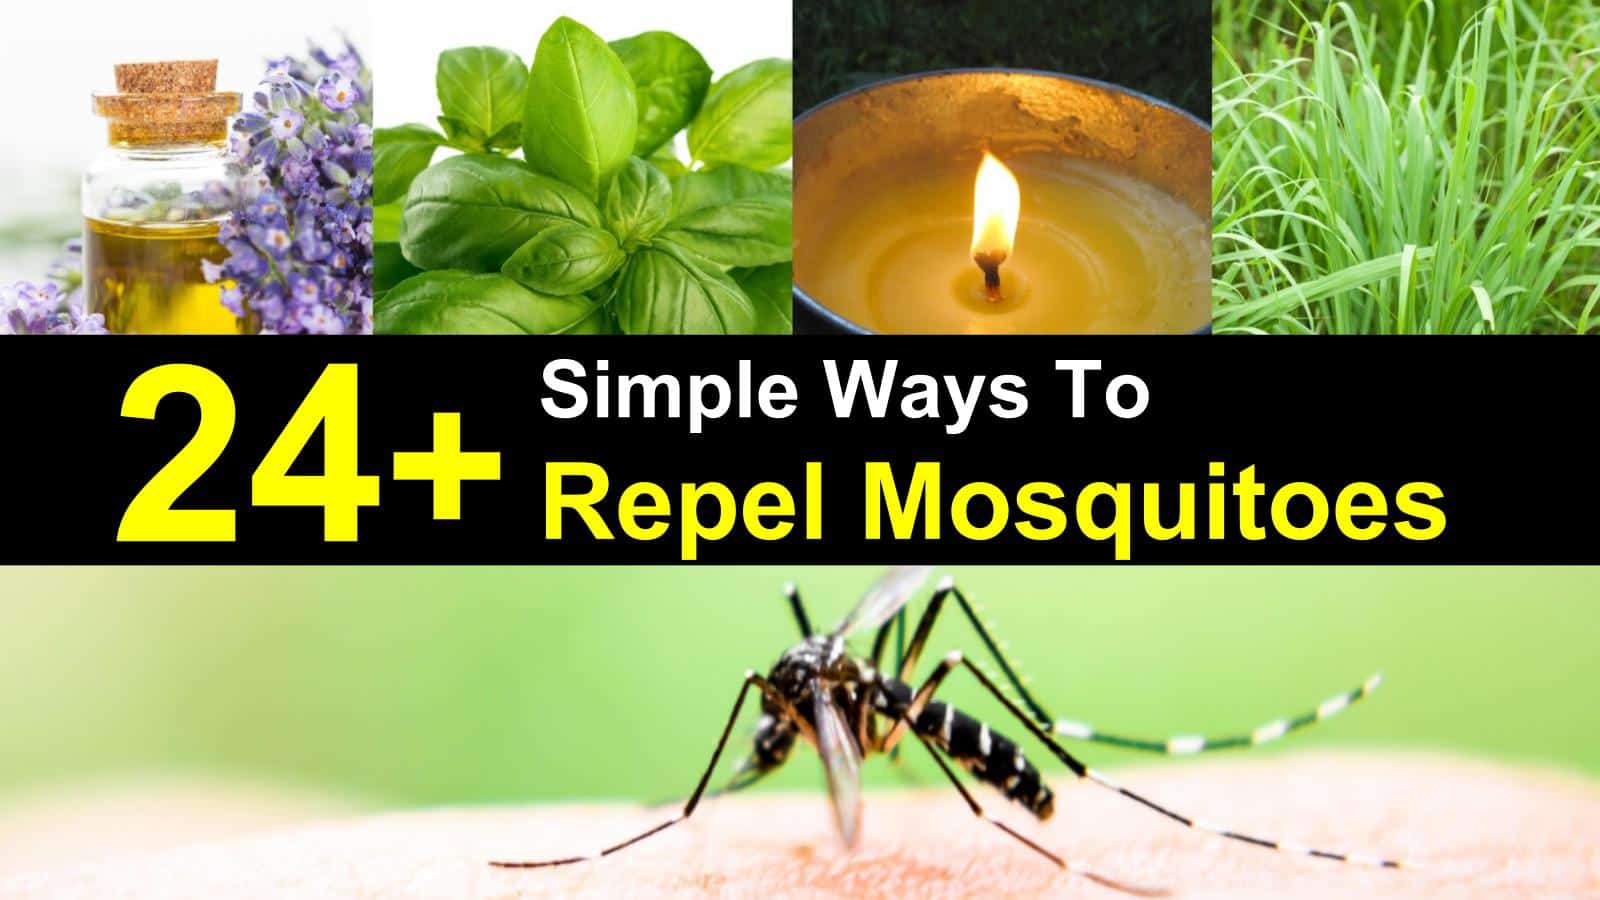 how to repel mosquitoes ways titlimg 1